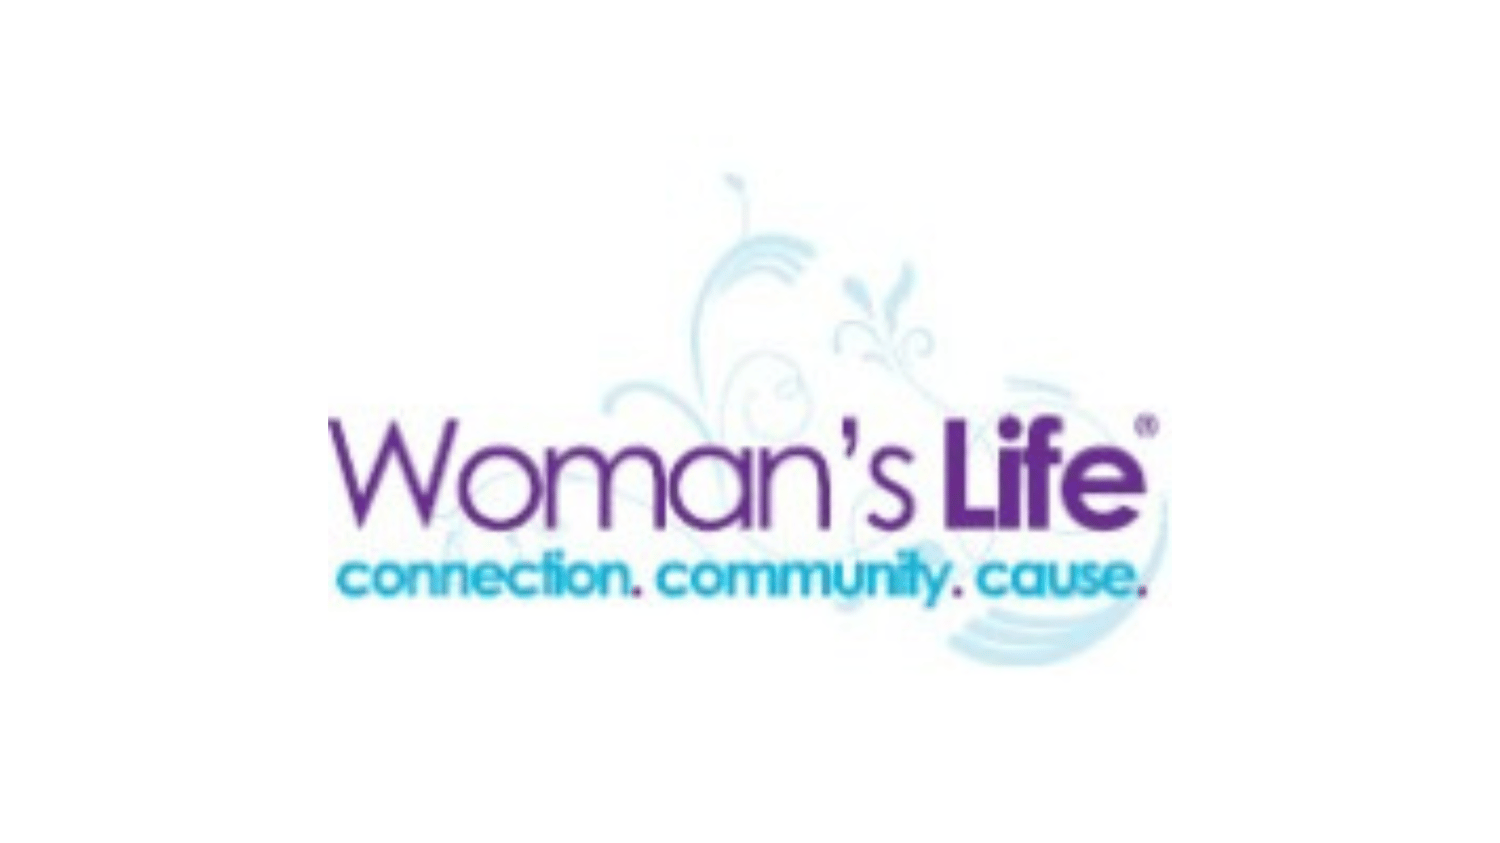 EMPOWERING WOMEN'S FUTURES: THE WOMAN'S LIFE INSURANCE SOCIETY